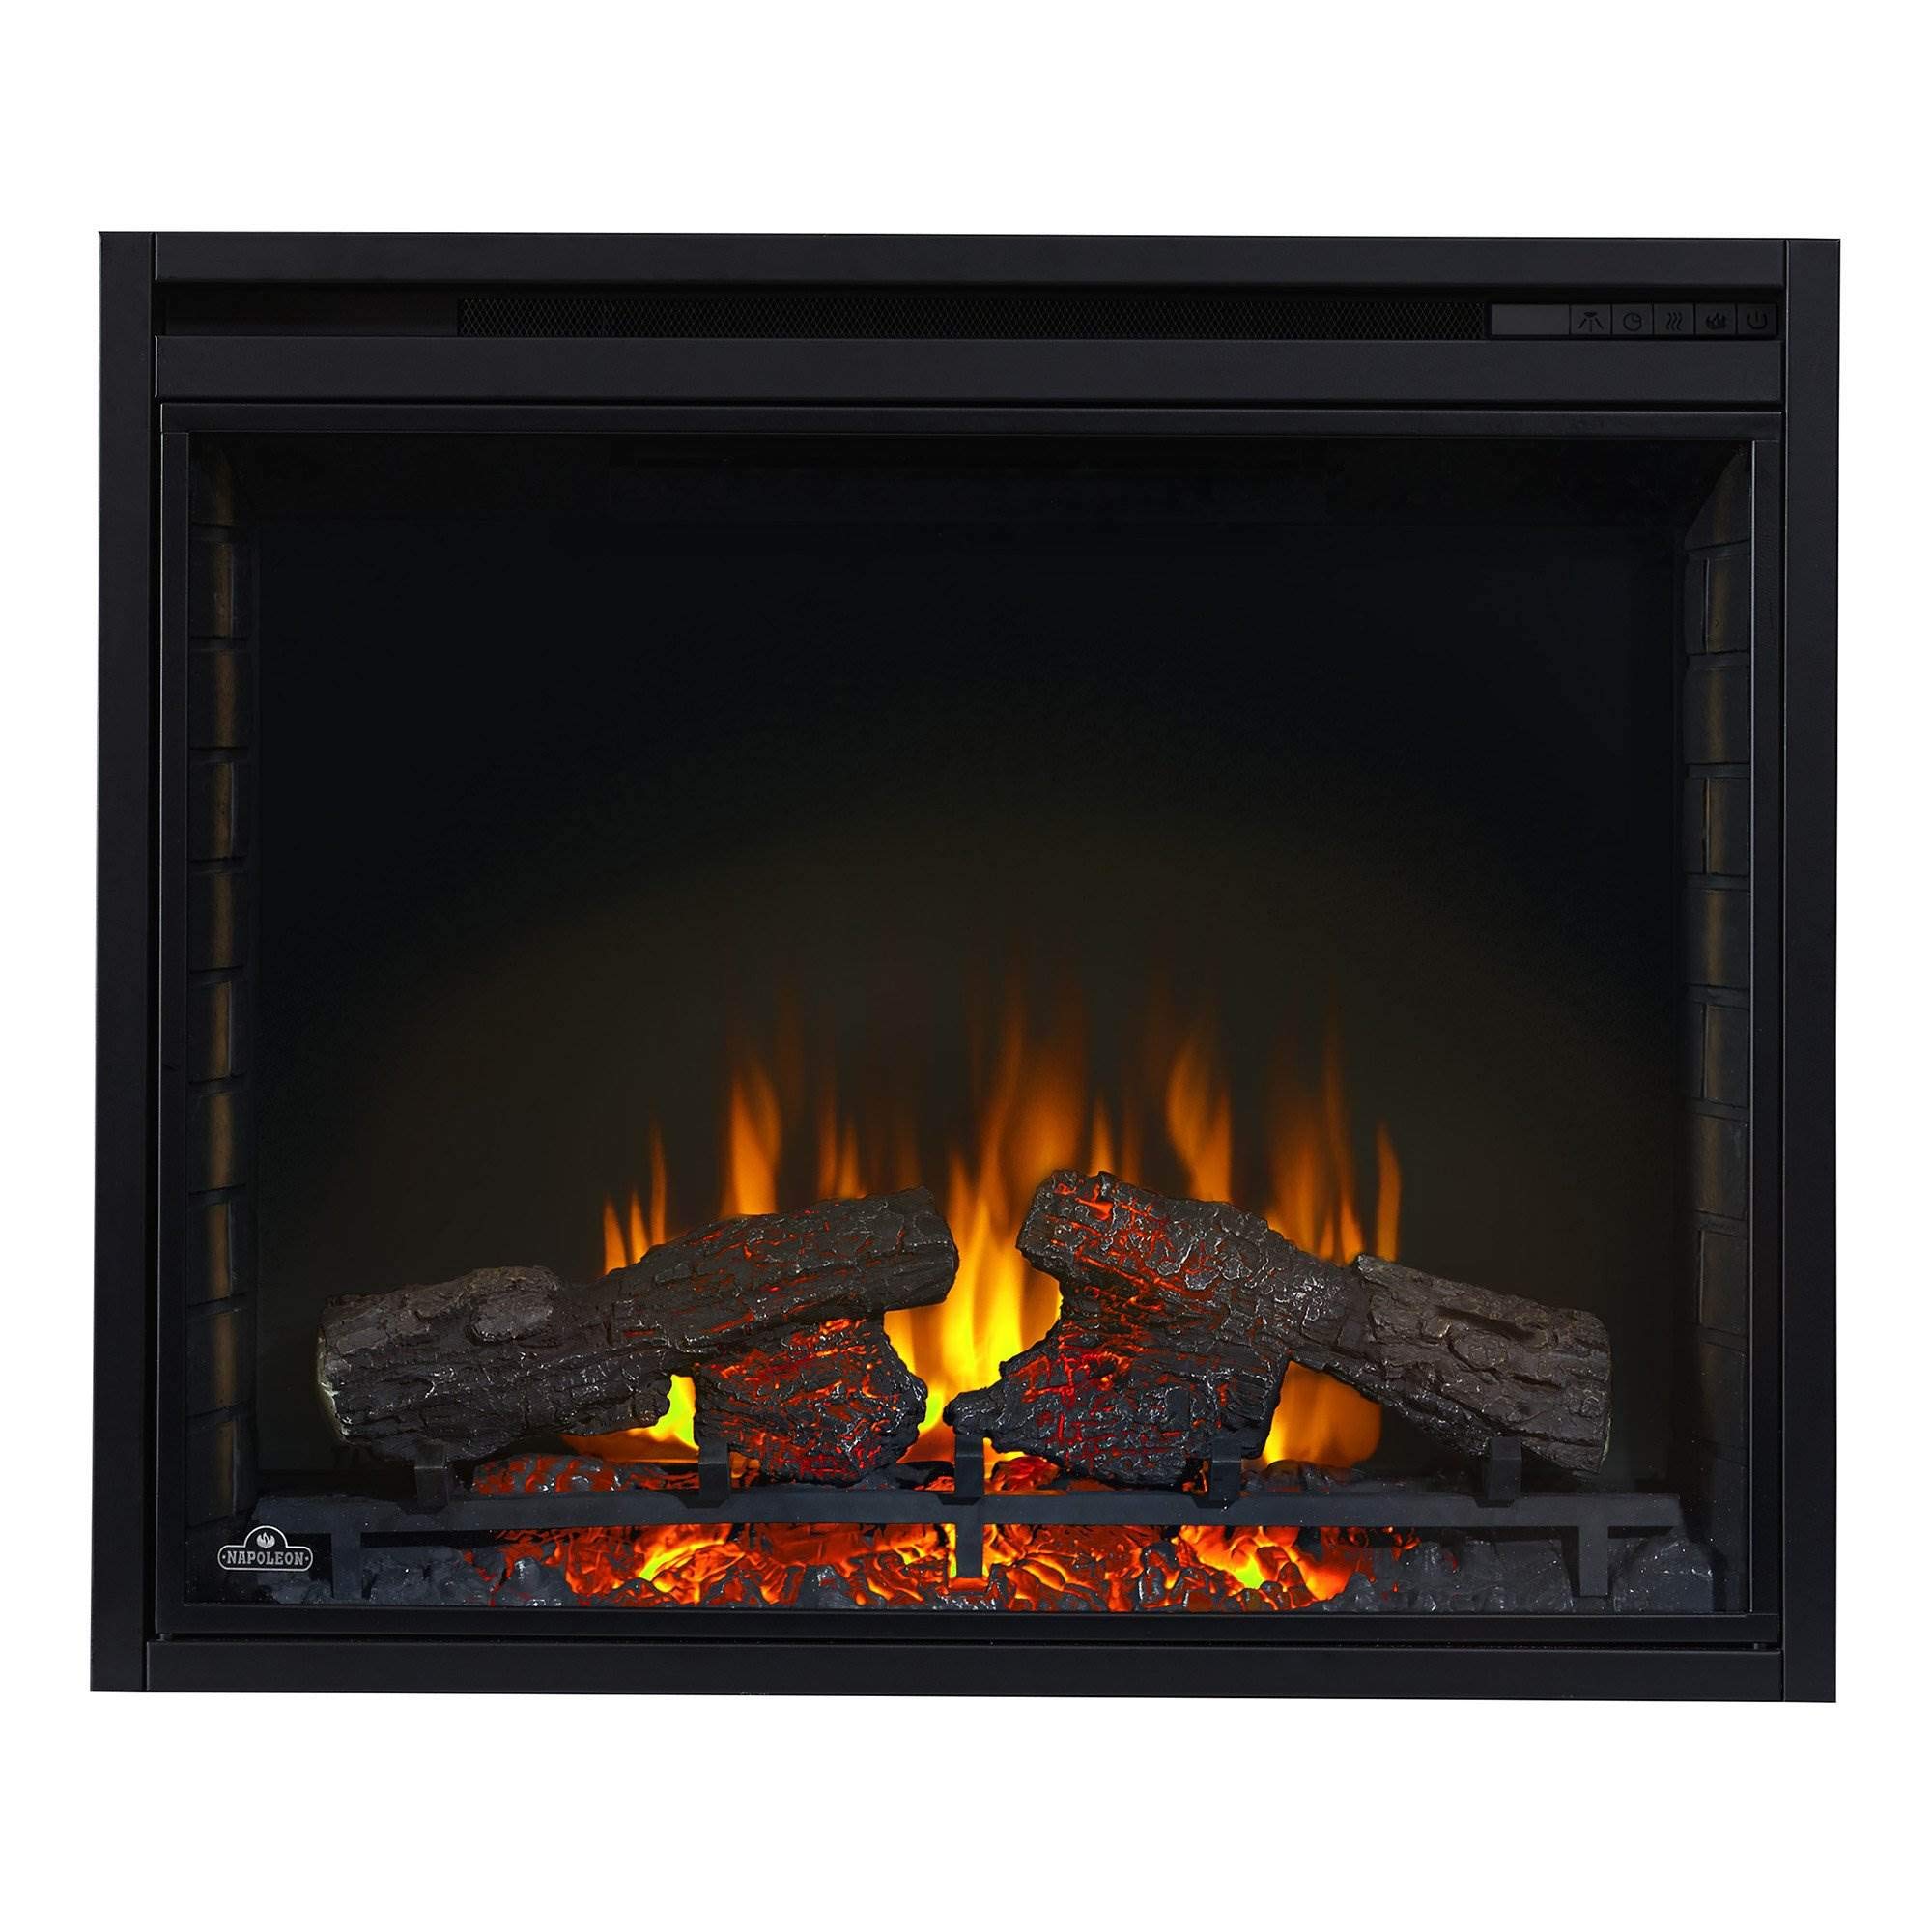 Napoleon Ascent 33 - NEFB33H - Built-in Electric Fireplace, 33-in, Realistic Logs & Flames, Self Trimming, Remote Included